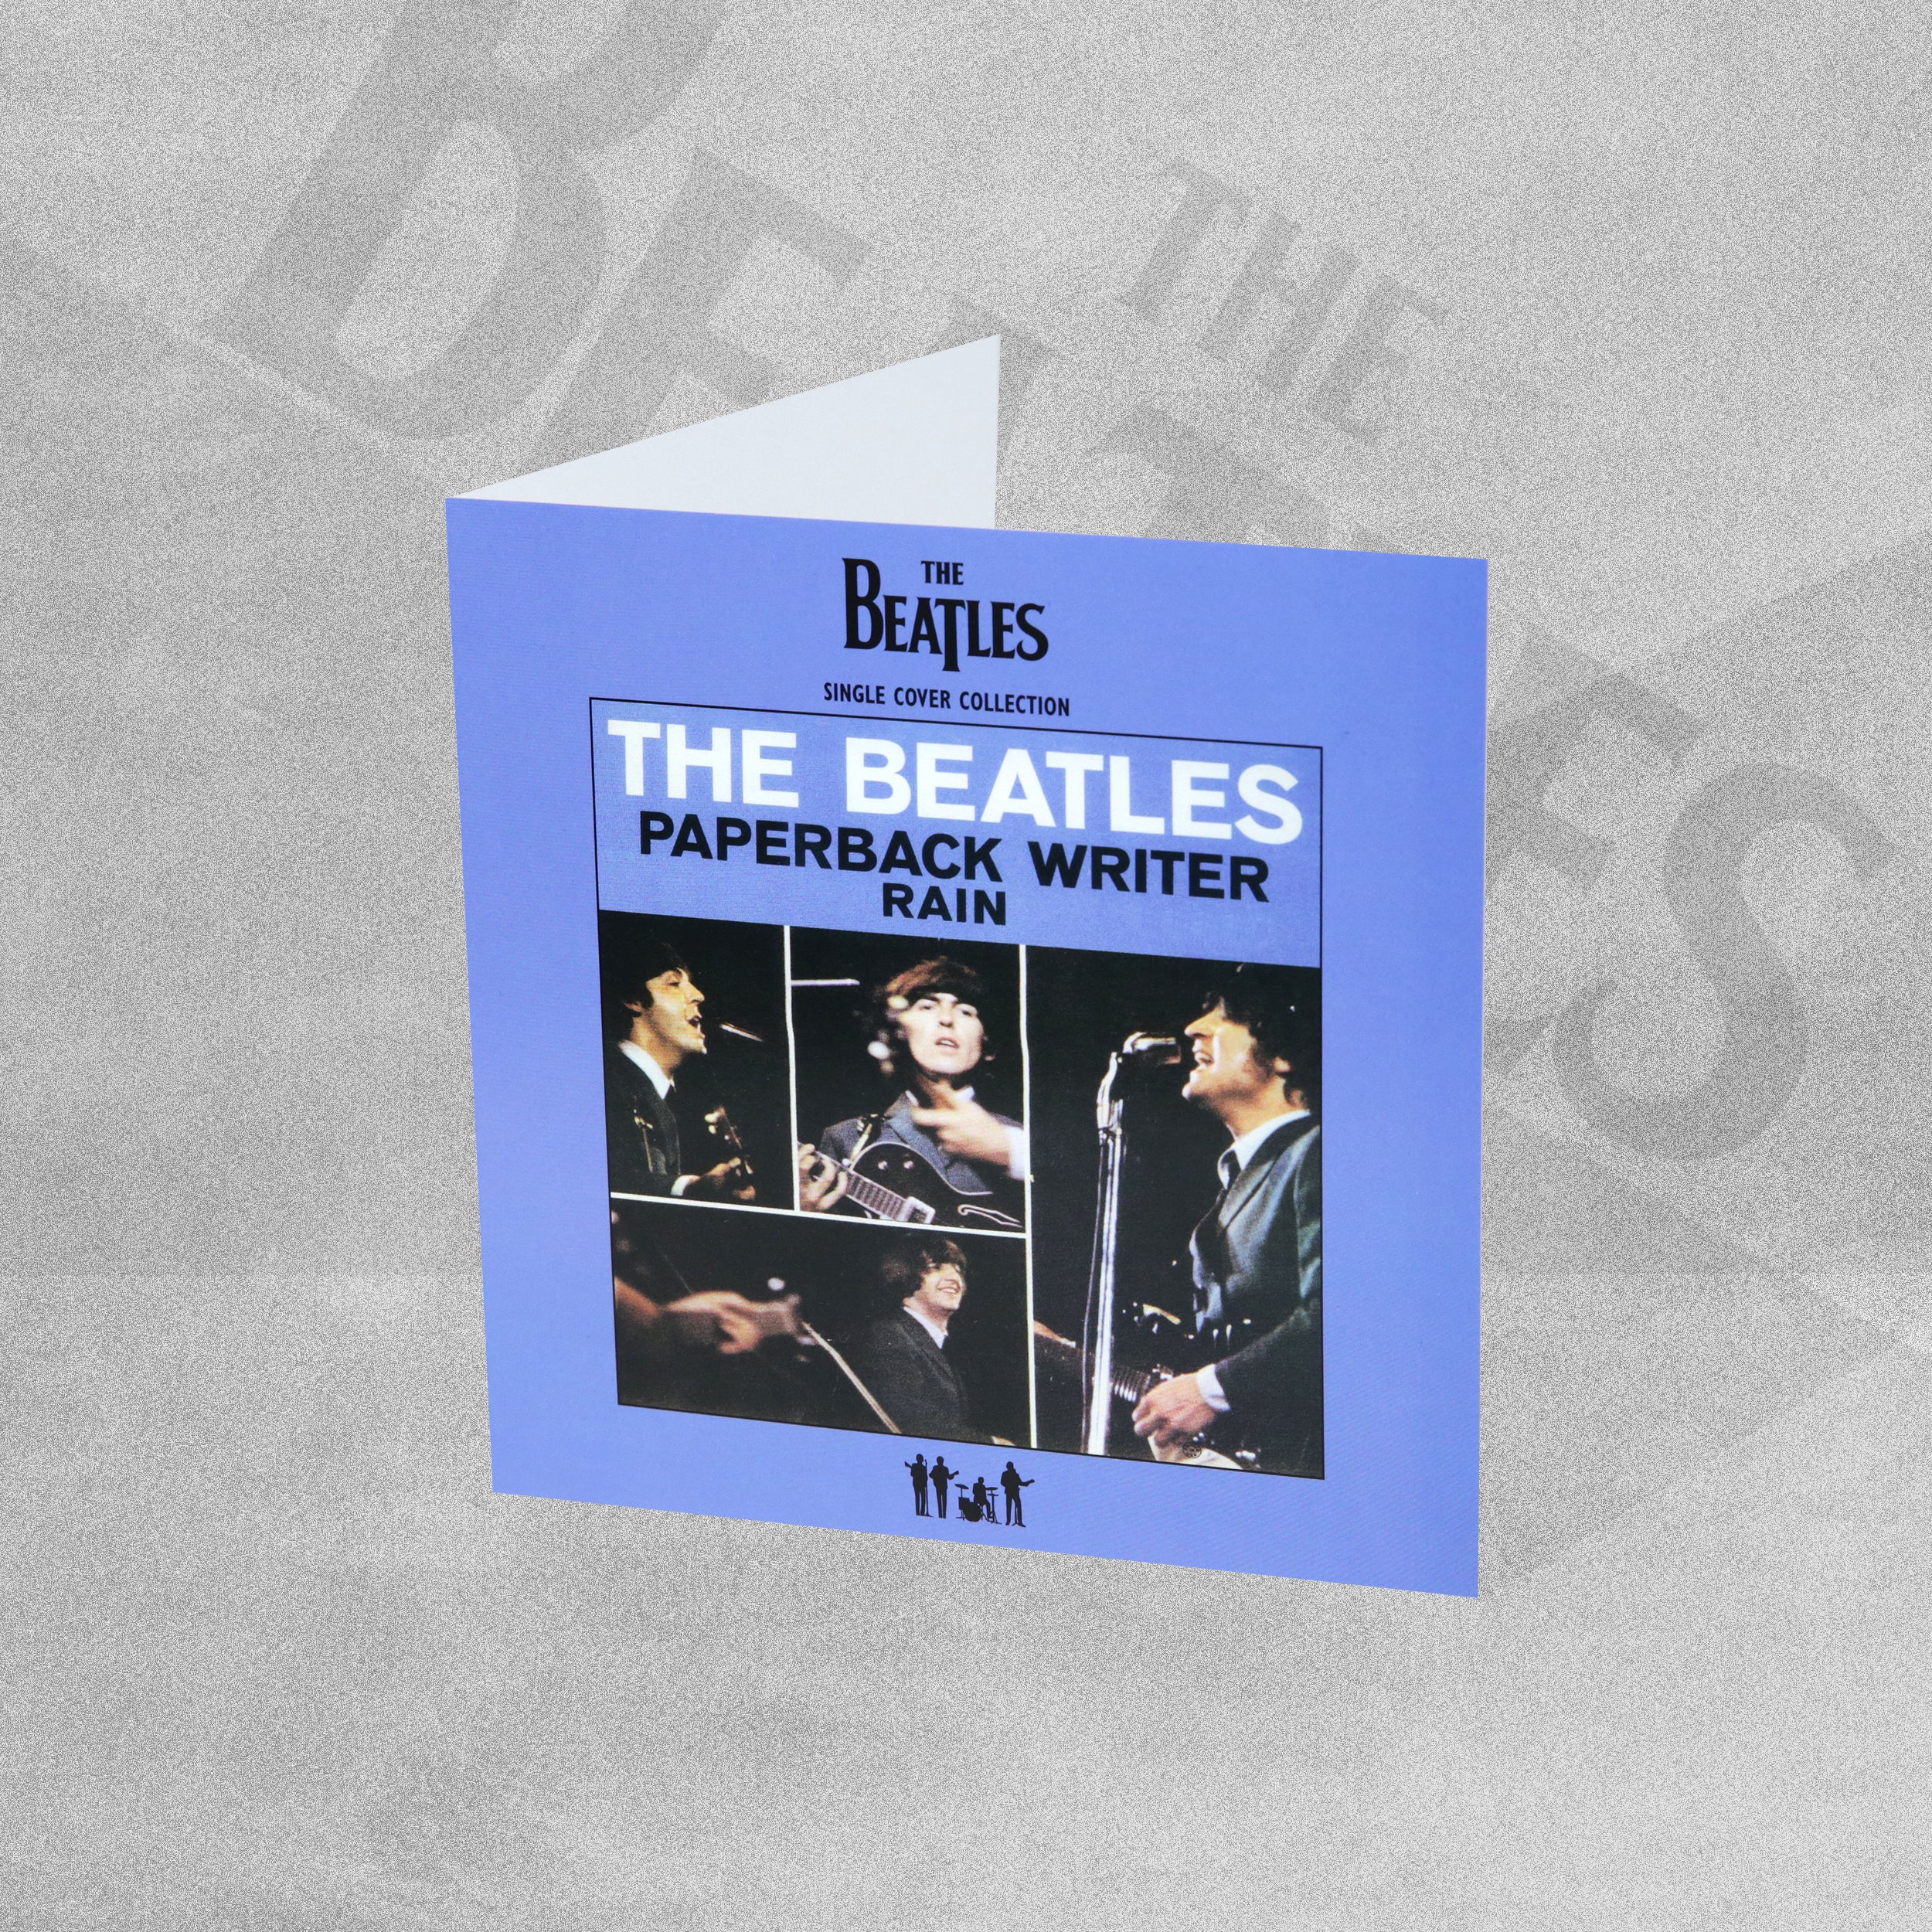 The Beatles Single Cover Collection Greeting Card - Paperback Writer